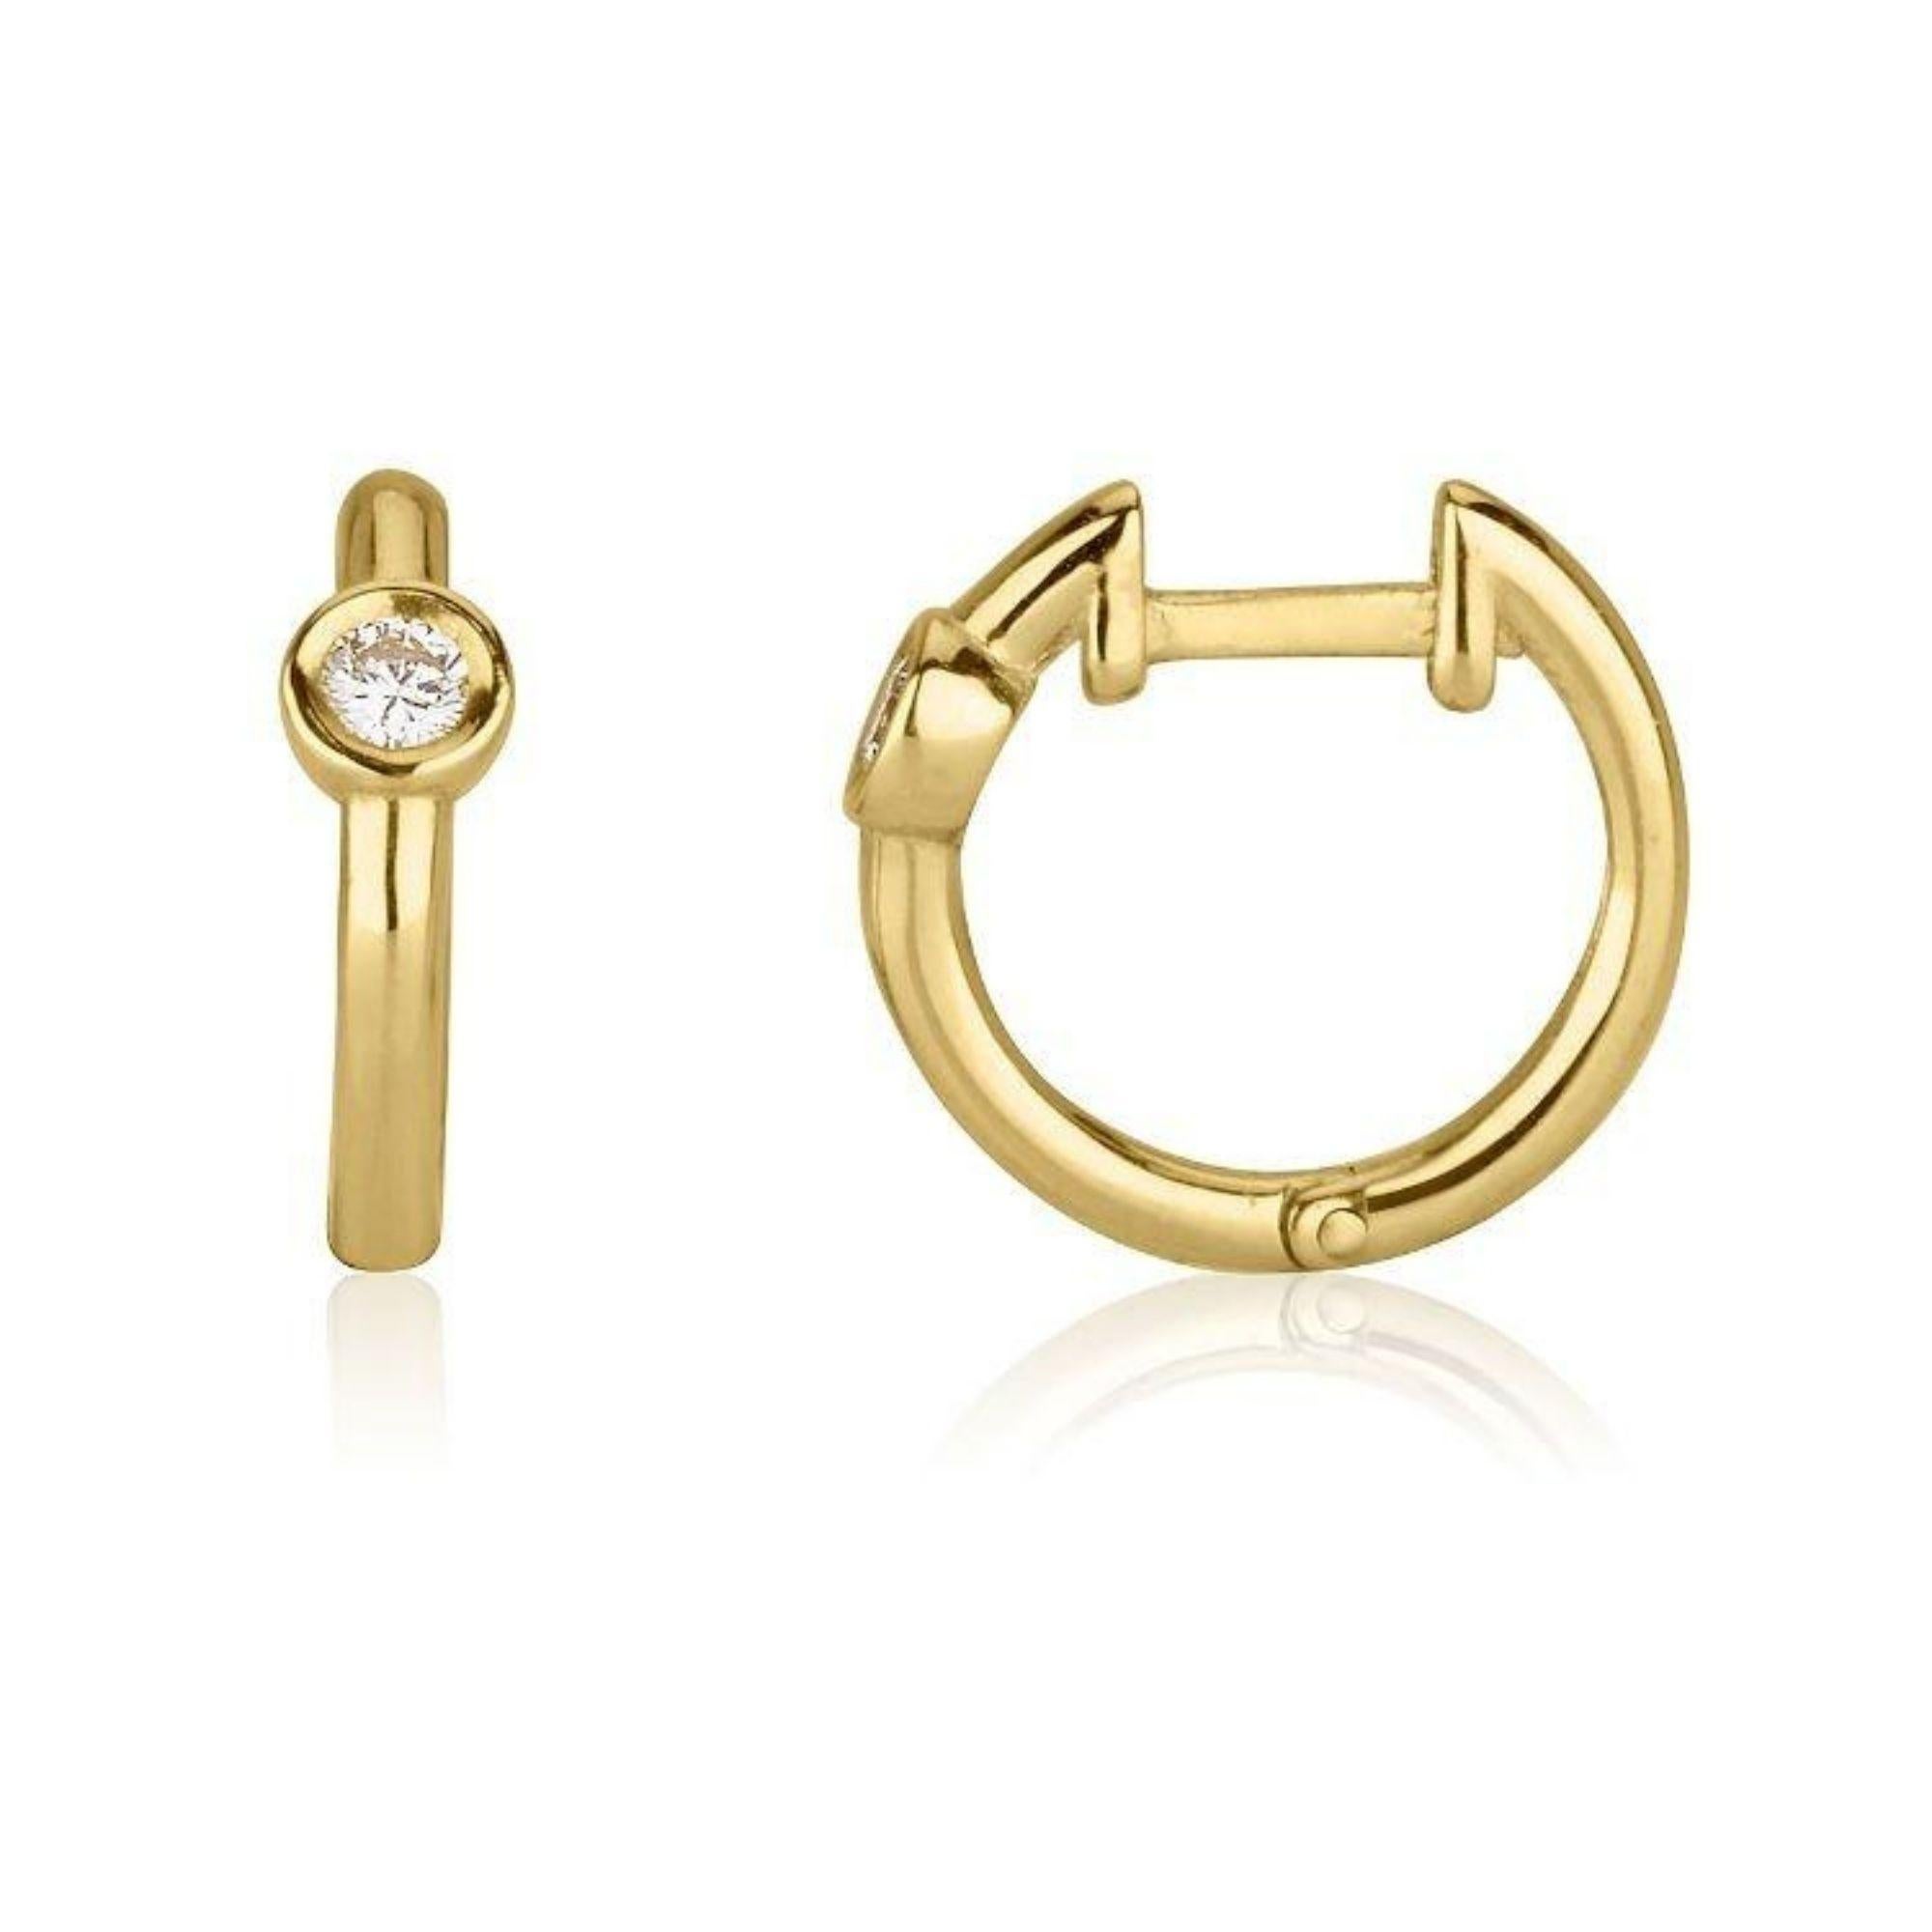 0.10 Carat Diamond Huggie Hoop Earrings in 14K Yellow Gold - Shlomit Rogel

A staple in every woman's jewelry collection - classic diamond hoop earrings. Handcrafted from 14k gold and bezel set with a genuine 0.05 carat diamond, these hoop earrings